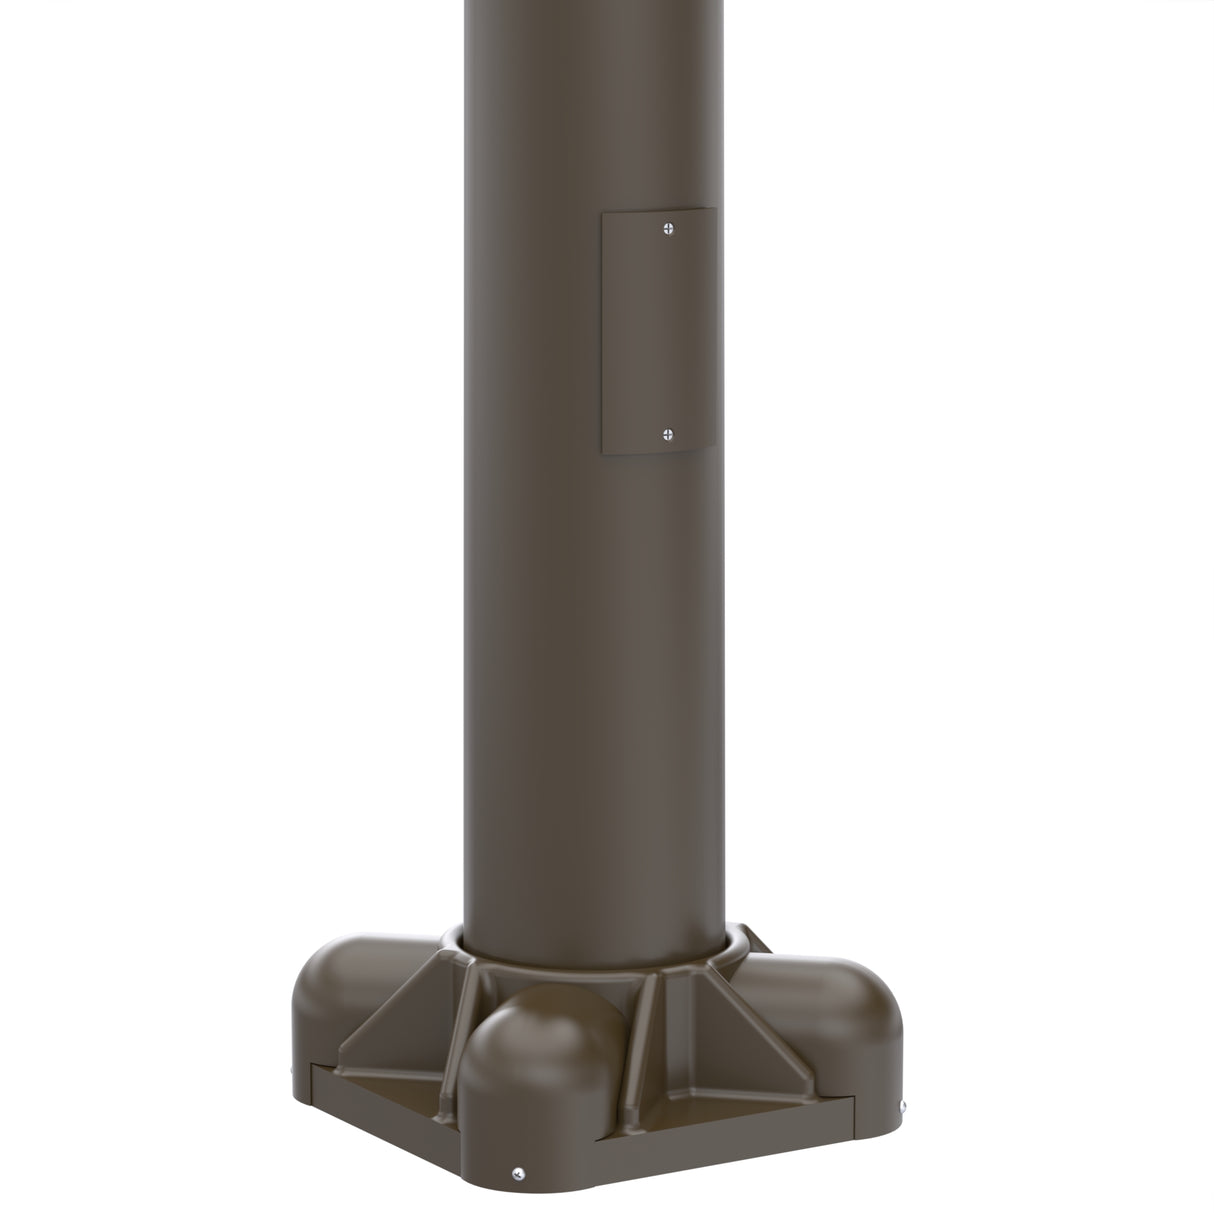 12' Tall x 5.0" Base OD x 3.0" Top OD x 0.156" Thick, Round Tapered Aluminum, Anchor Base Light Pole